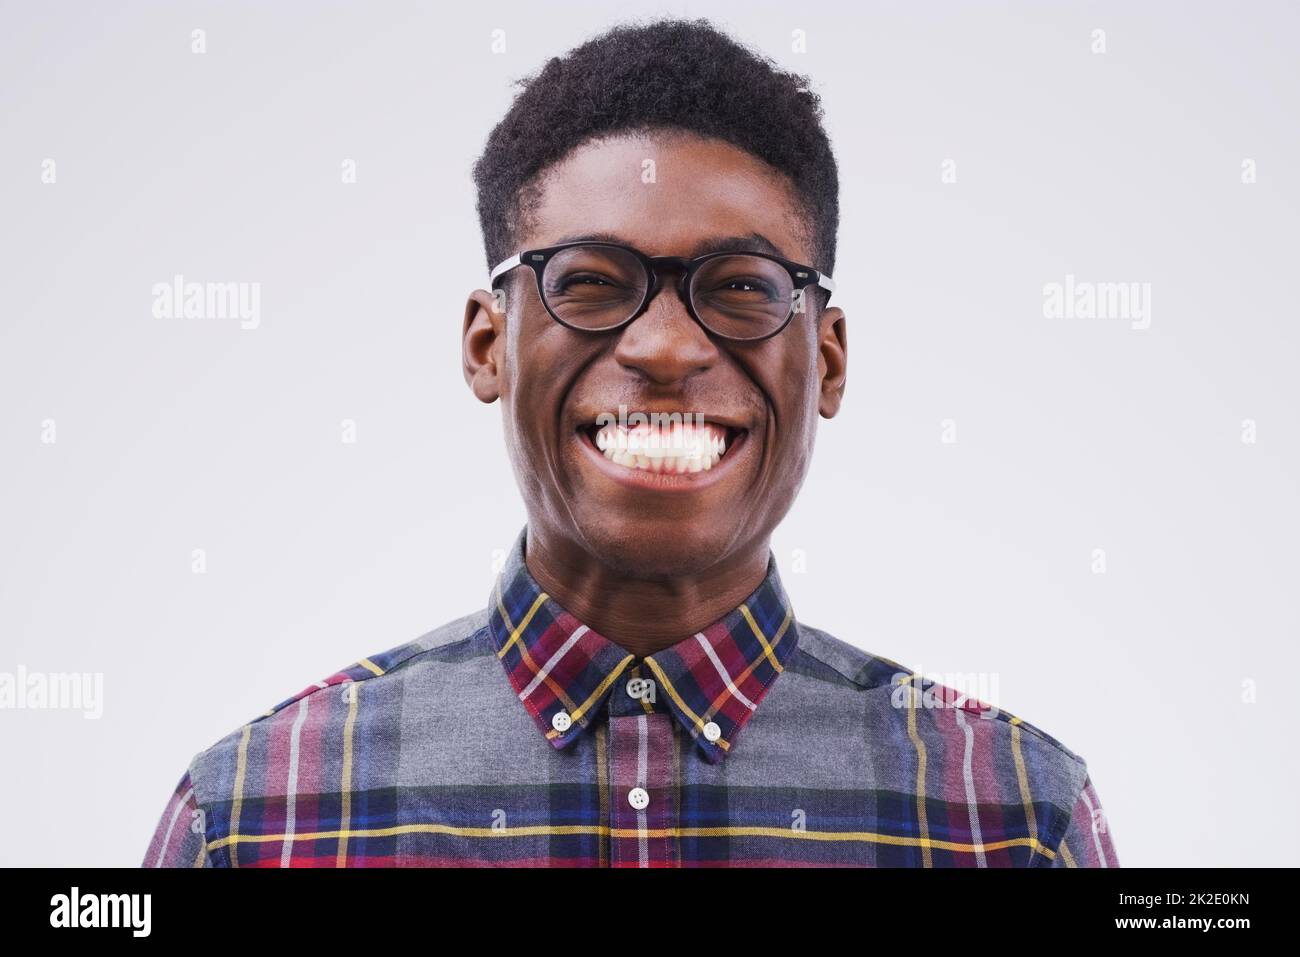 Lifes better when youre smiling. Studio shot of a young man making a funny face against a gray background. Stock Photo